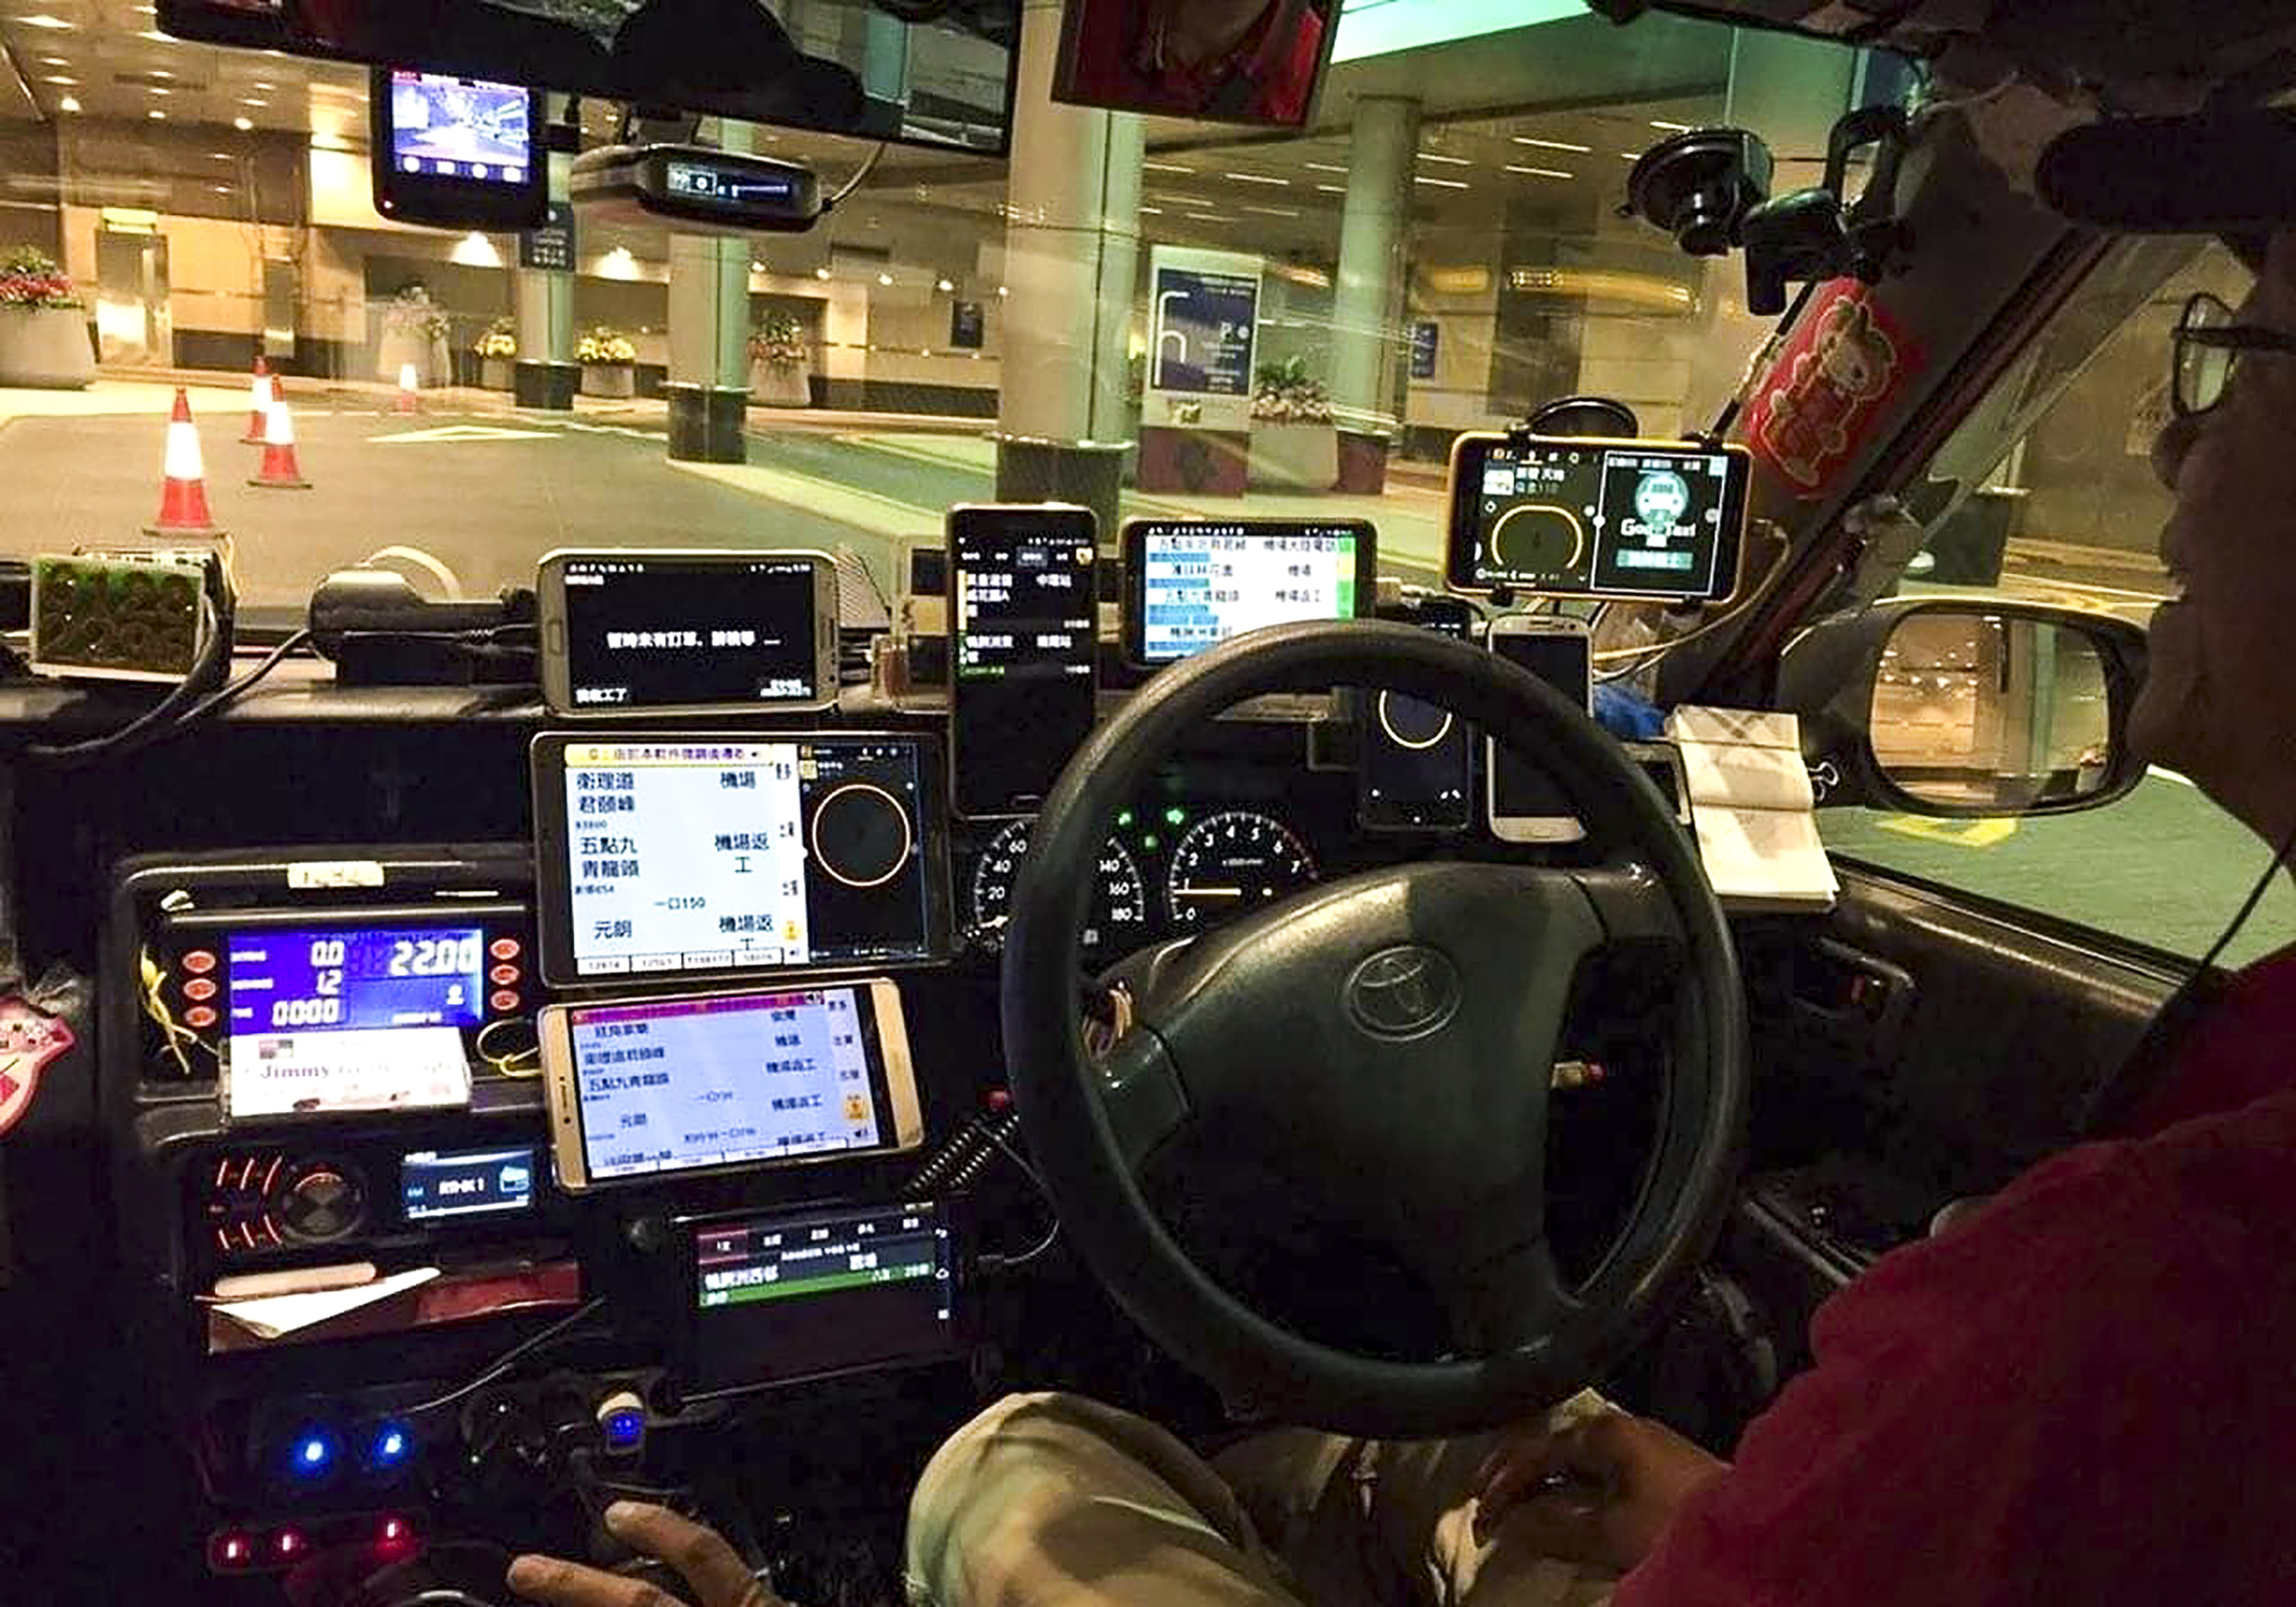 A taxi driver who has lots of phones in his taxi. Hong Kong drivers will face a maximum fine of HK$2,000 if they place more than two phones on the dashboards of their vehicles under a proposal to tighten the safety rules. Photo: Facebook